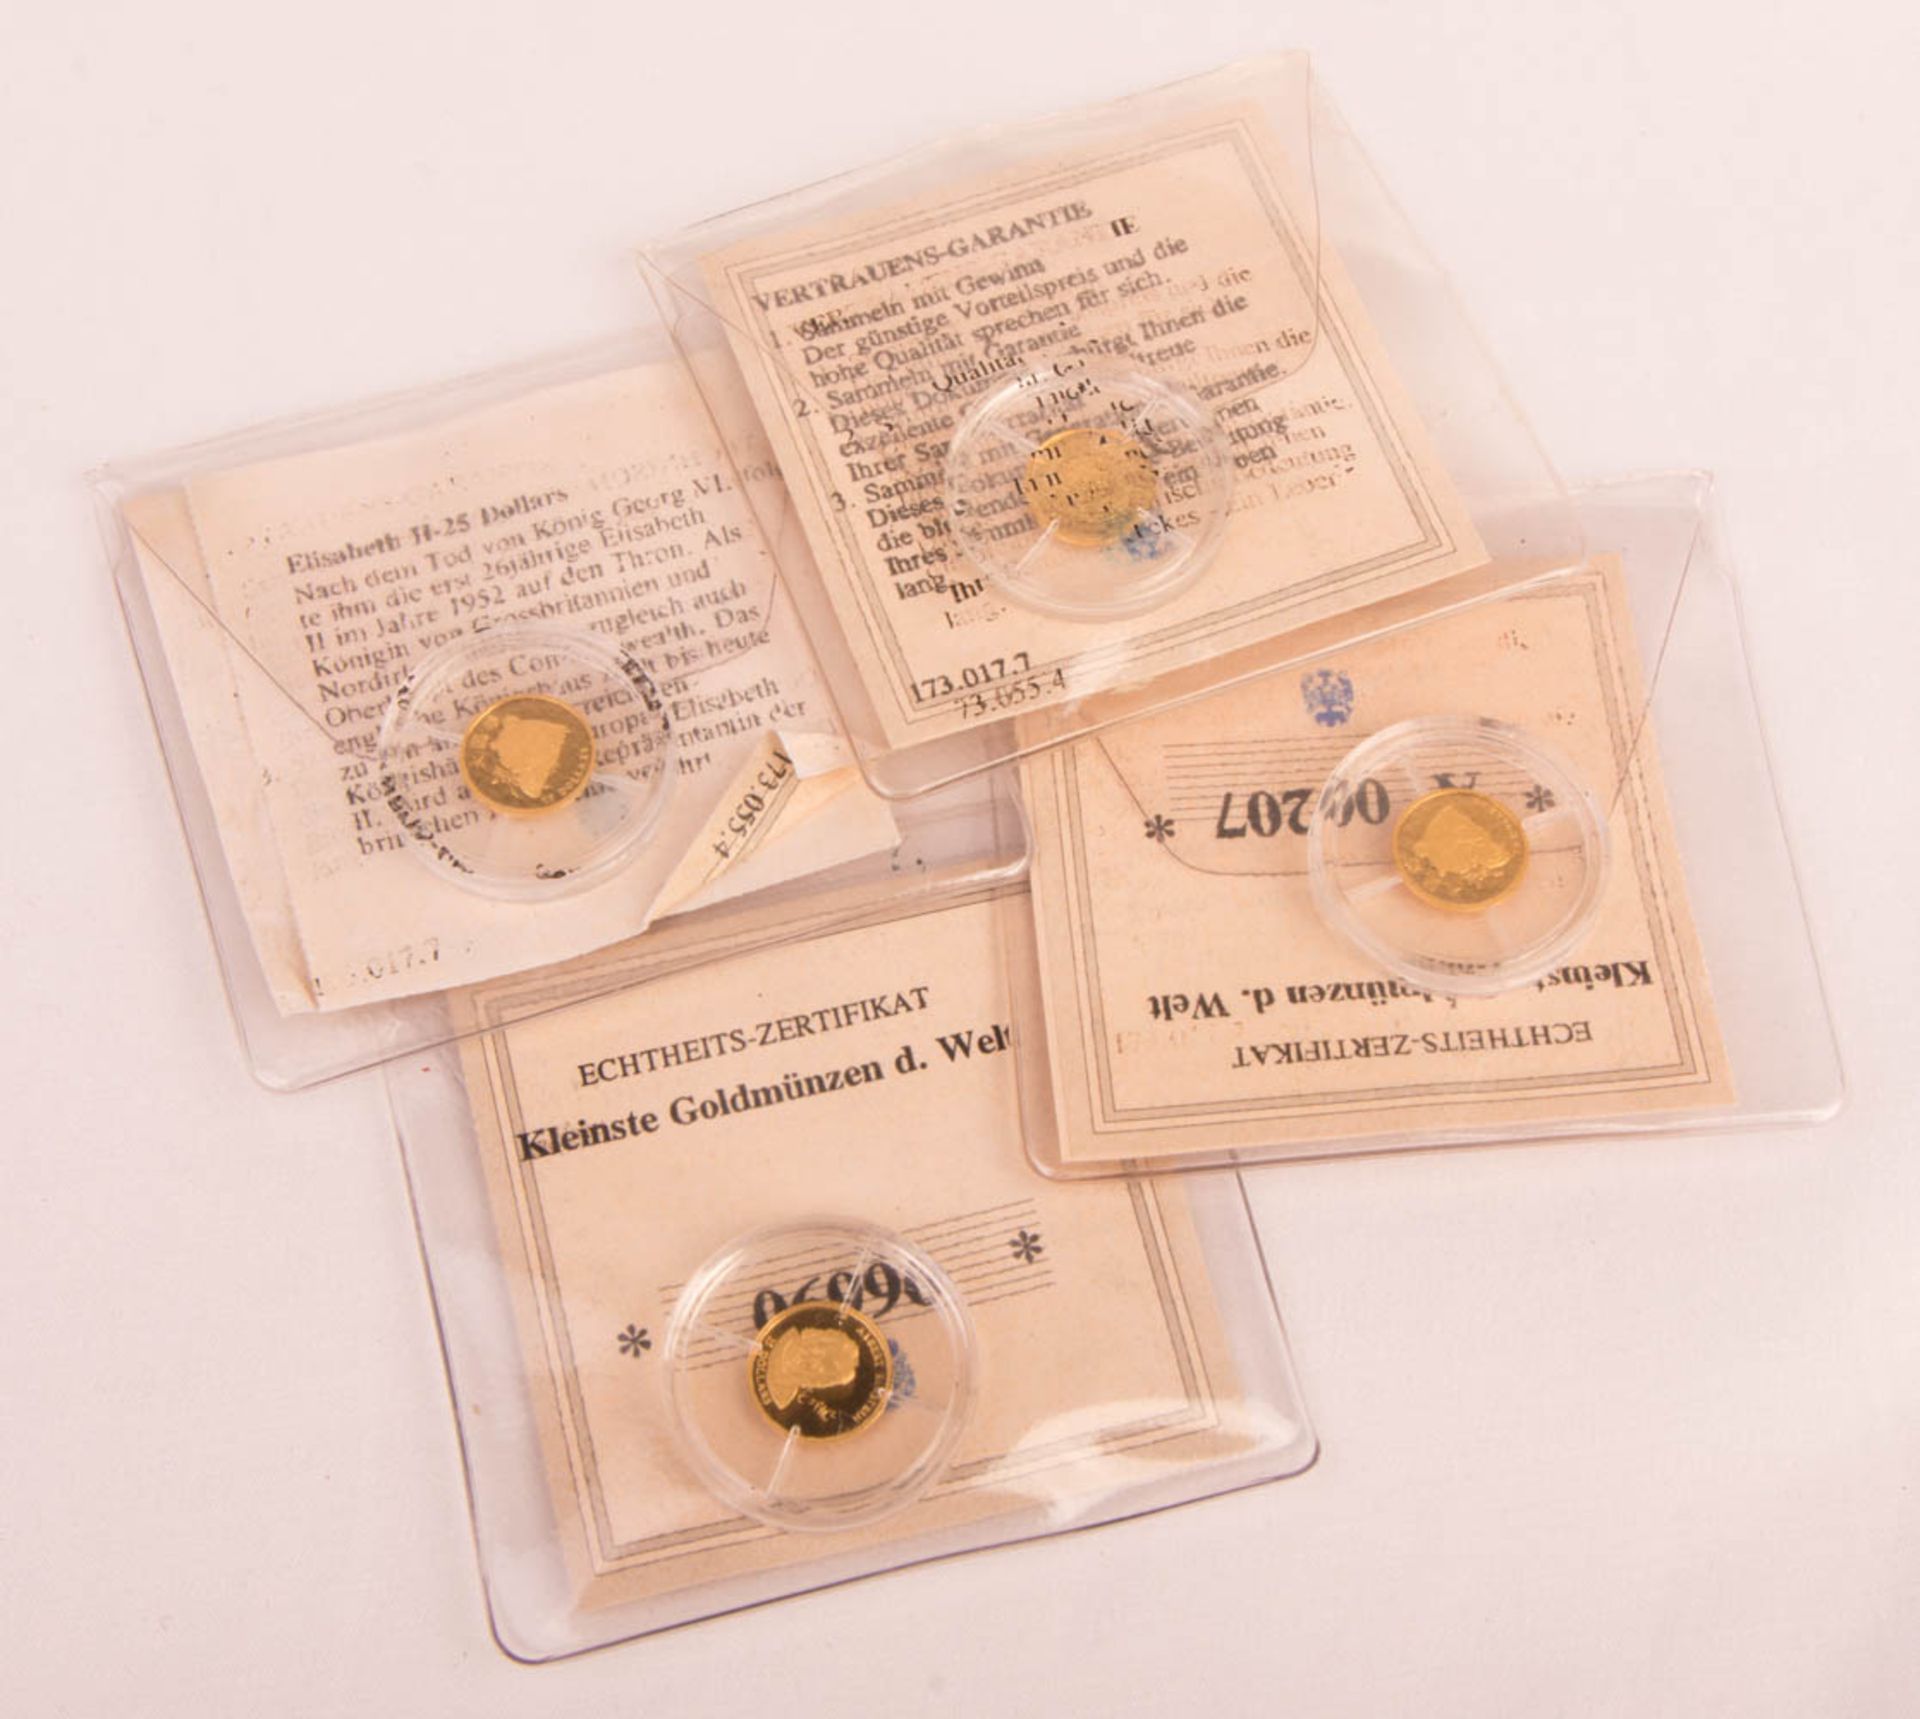 Four gold coins, 'Smallest gold coins in the world'.